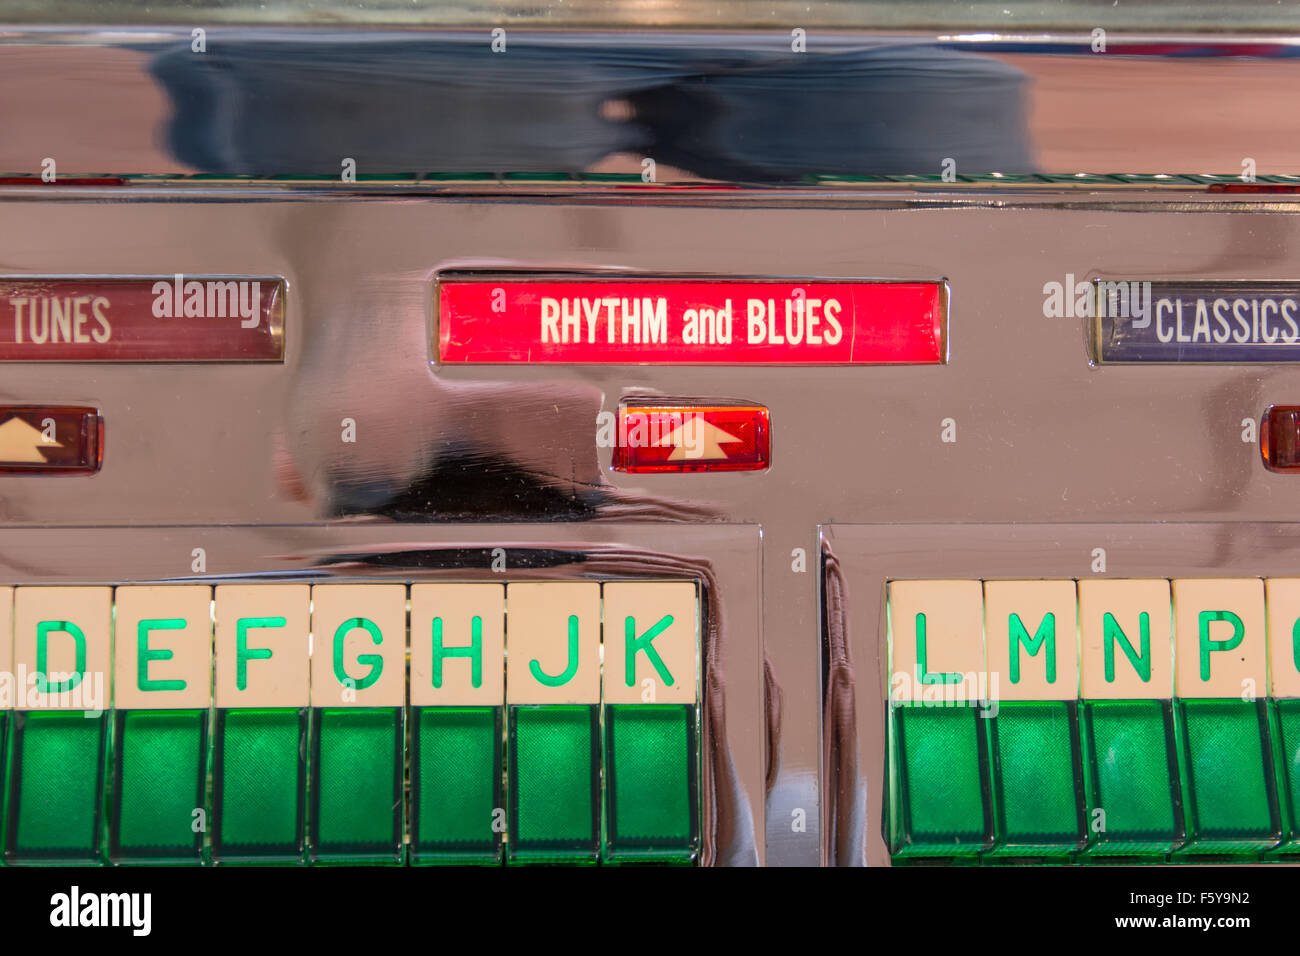 Old fashioned jukebox used to play records: rhythm and blues sign Stock Photo